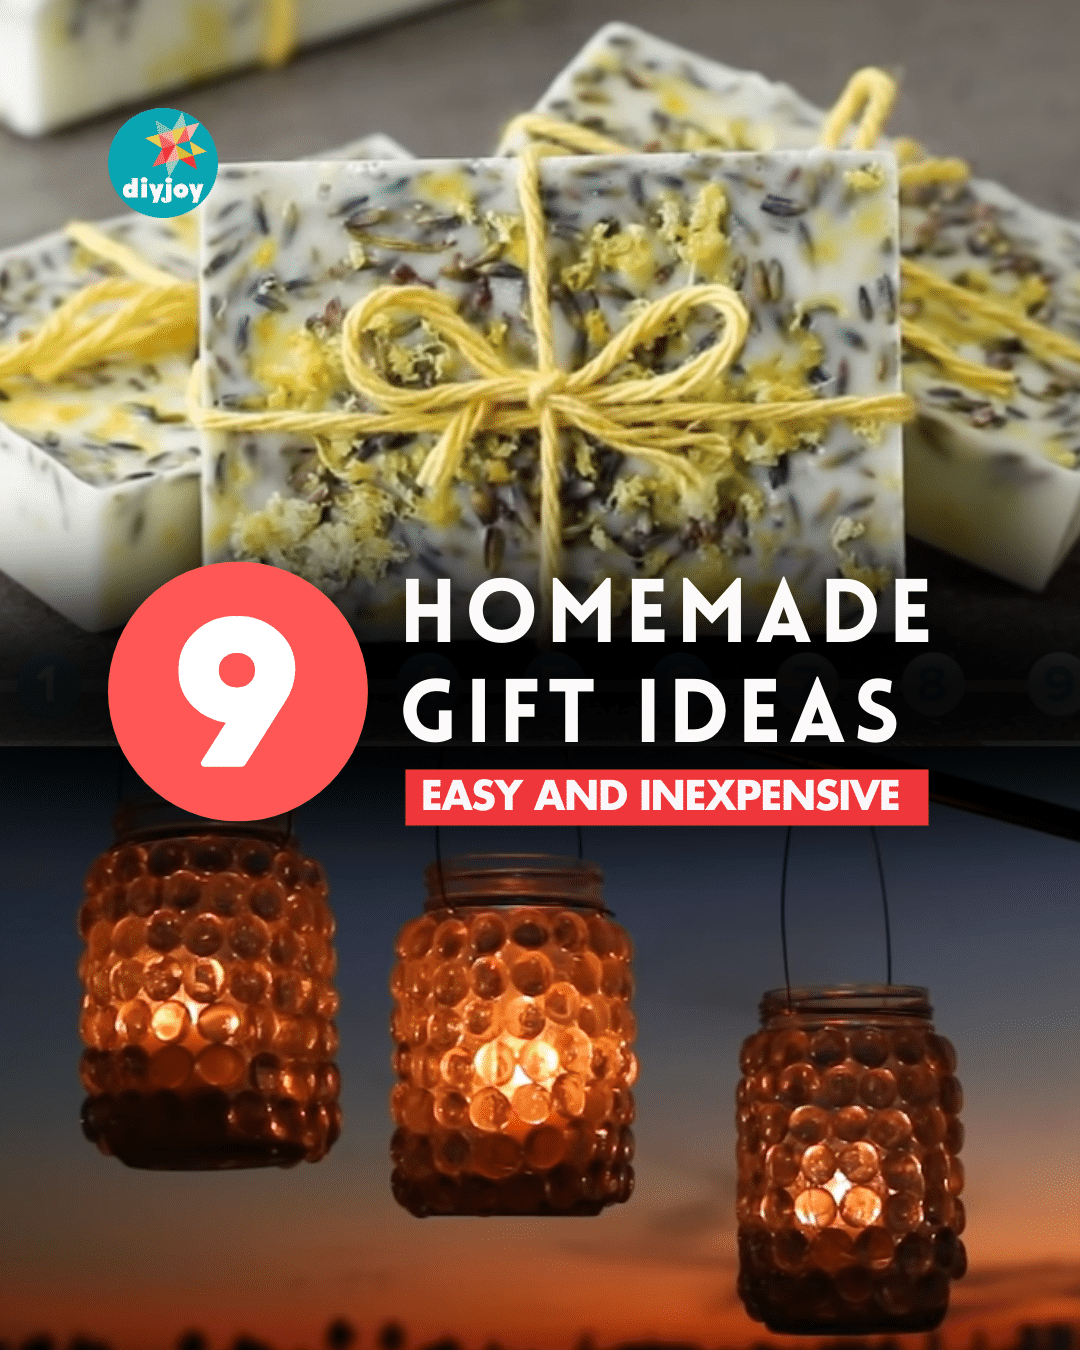 9 Simple Homemade Gift Ideas for the Holidays